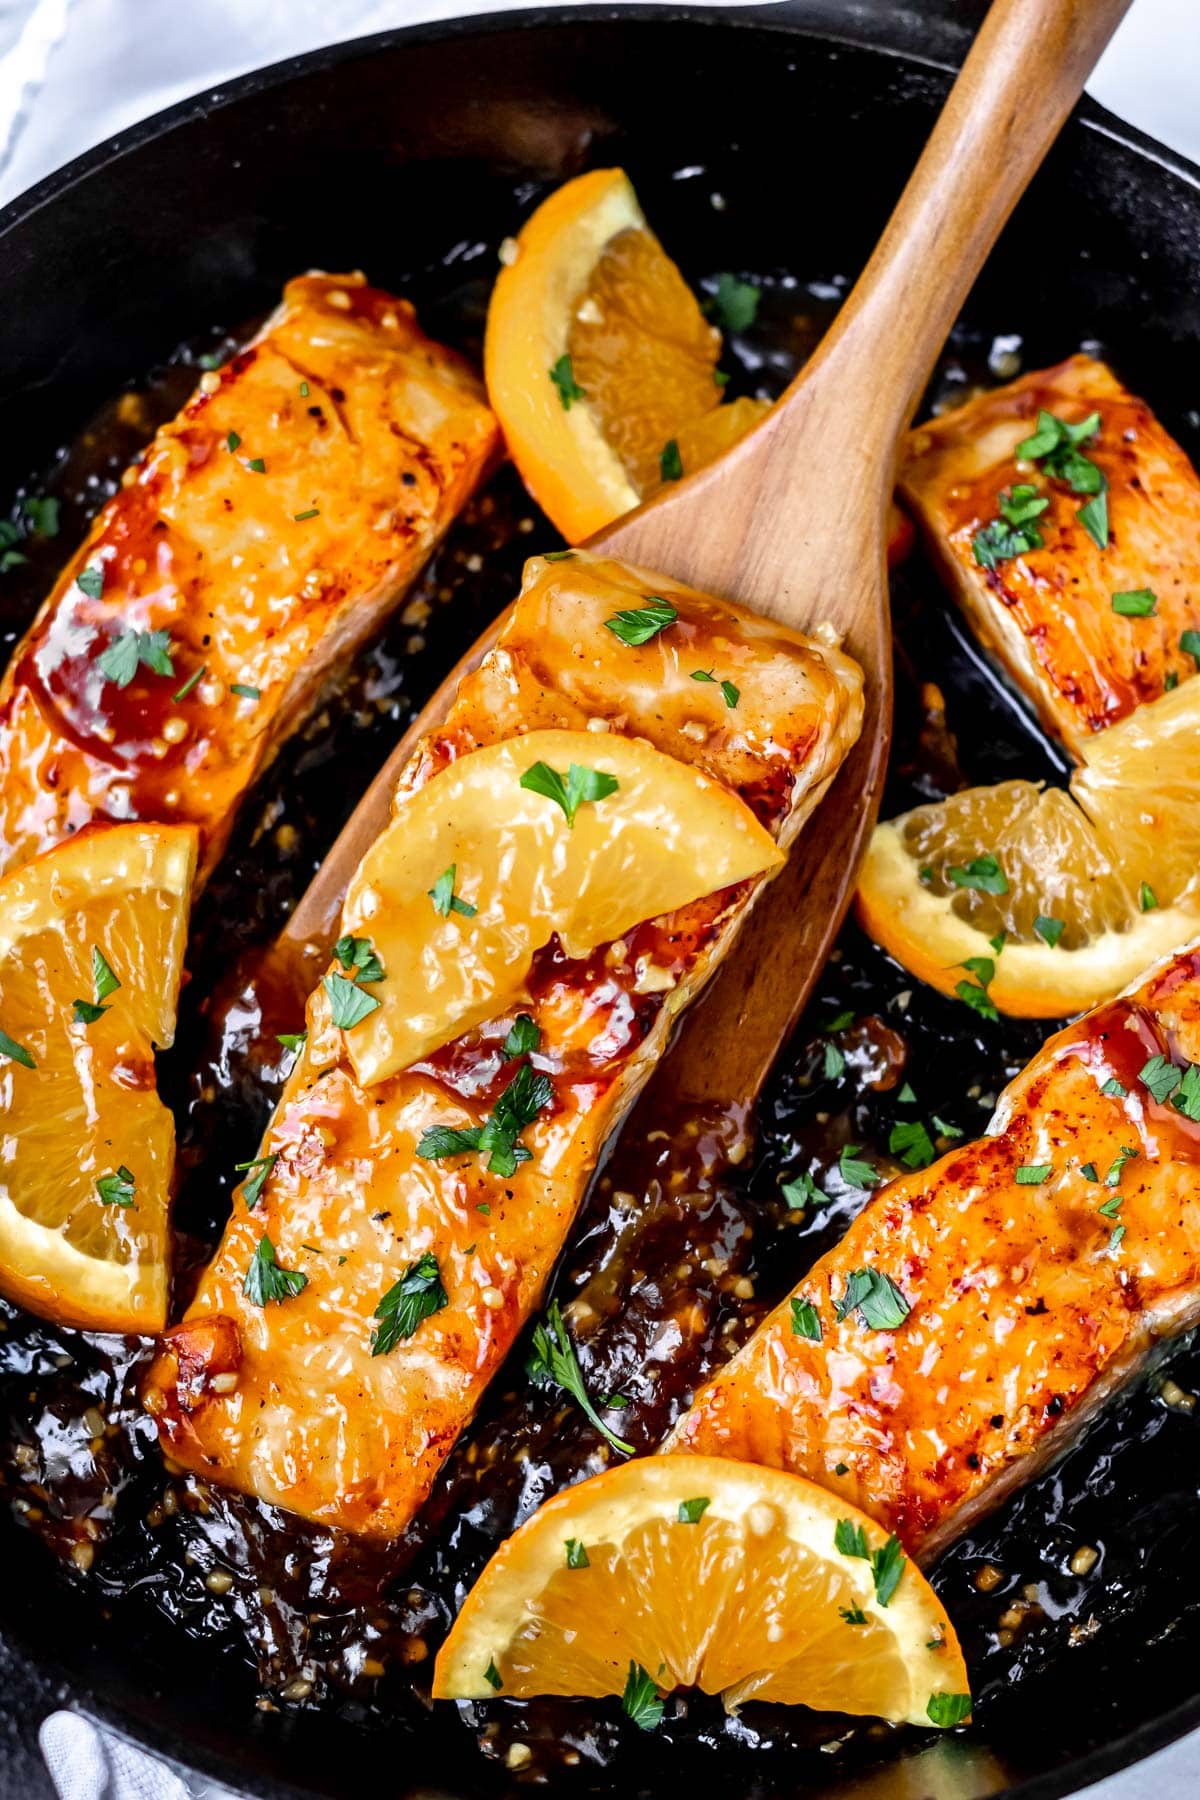 A filet of orange glazed salmon in a cast iron pan being lifted up with a wood turner.